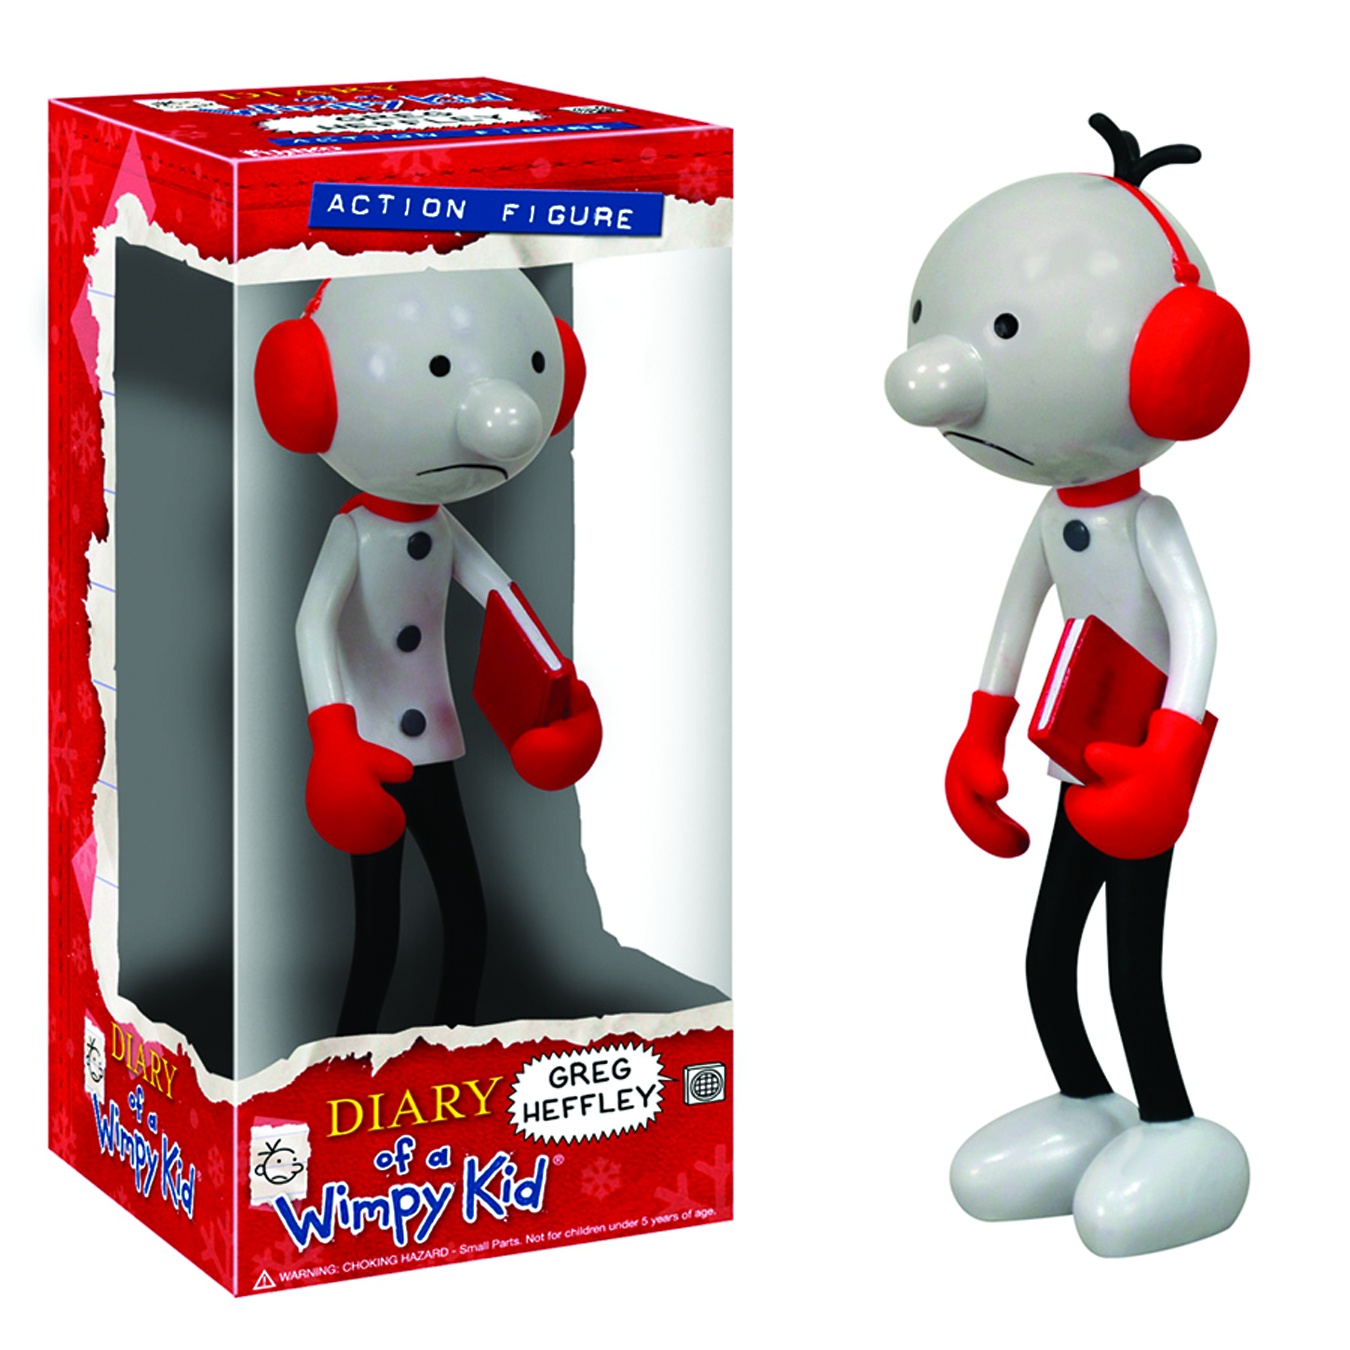 OCT111697 - DIARY OF A WIMPY KID HOLIDAY GREG HEFFLEY AF - Previews World